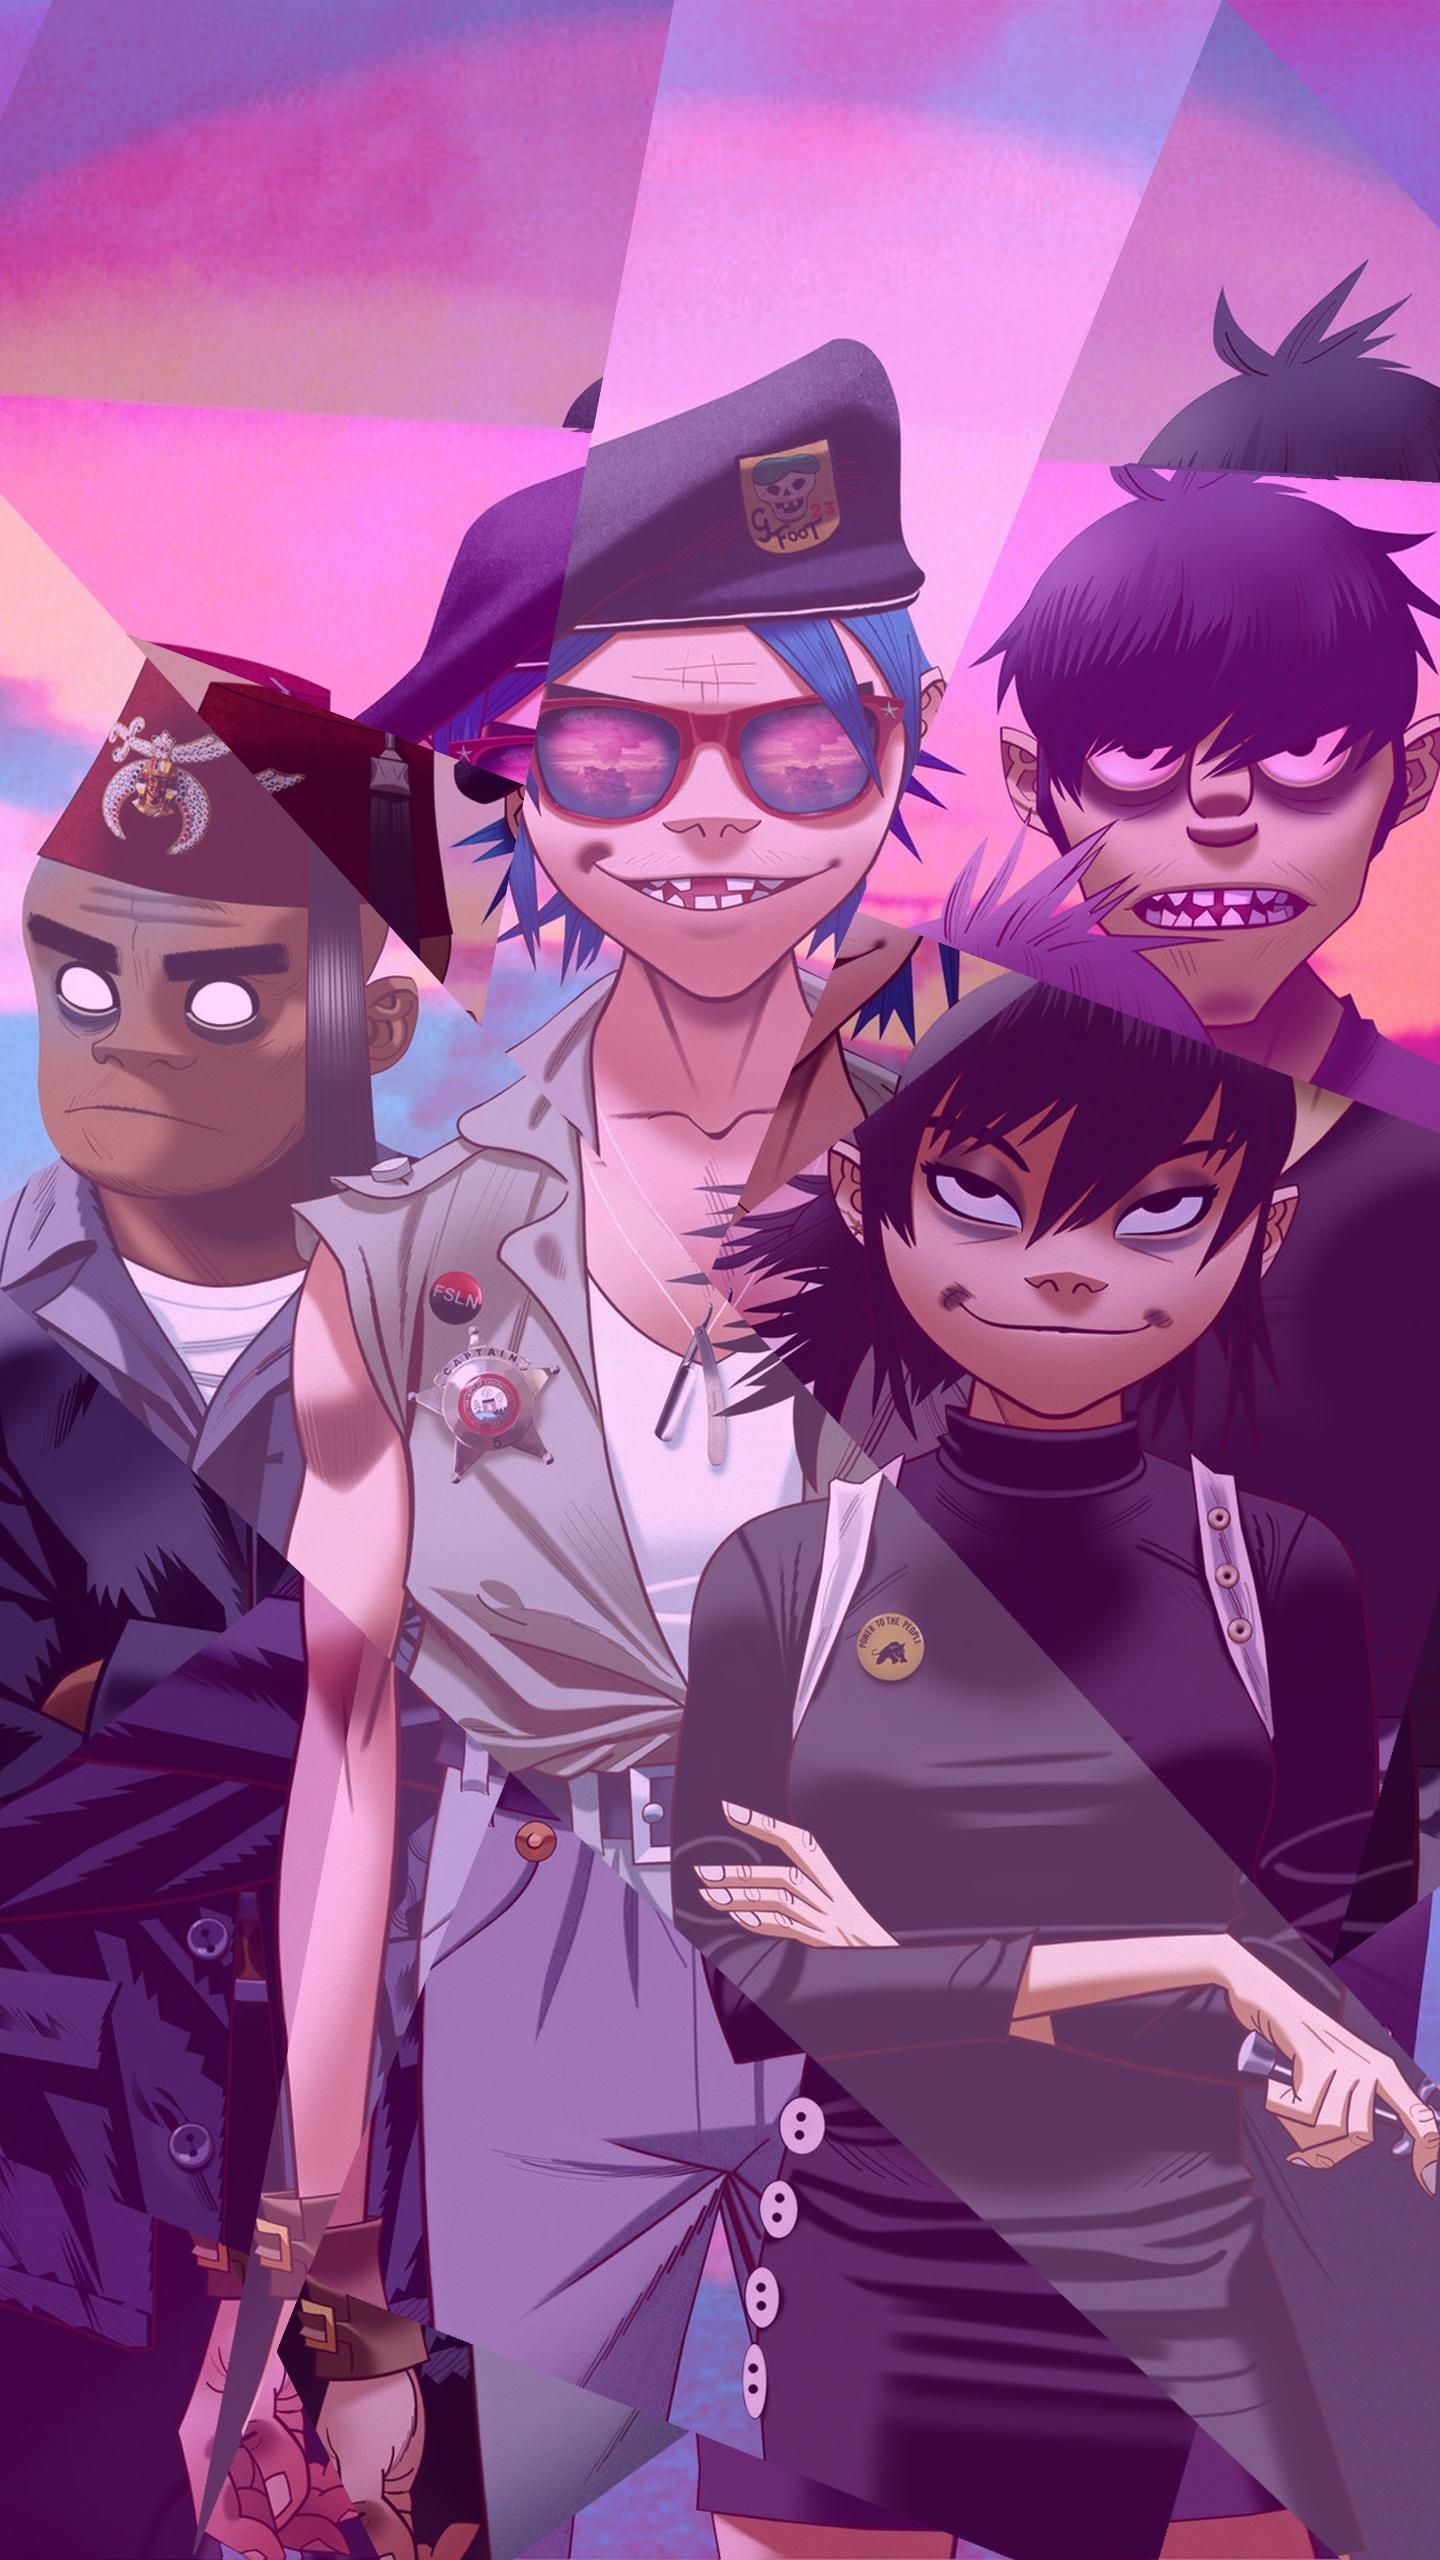 Noodle (Gorillaz): The award-winning virtual group, Two decades of the animated electronic career. 1440x2560 HD Wallpaper.